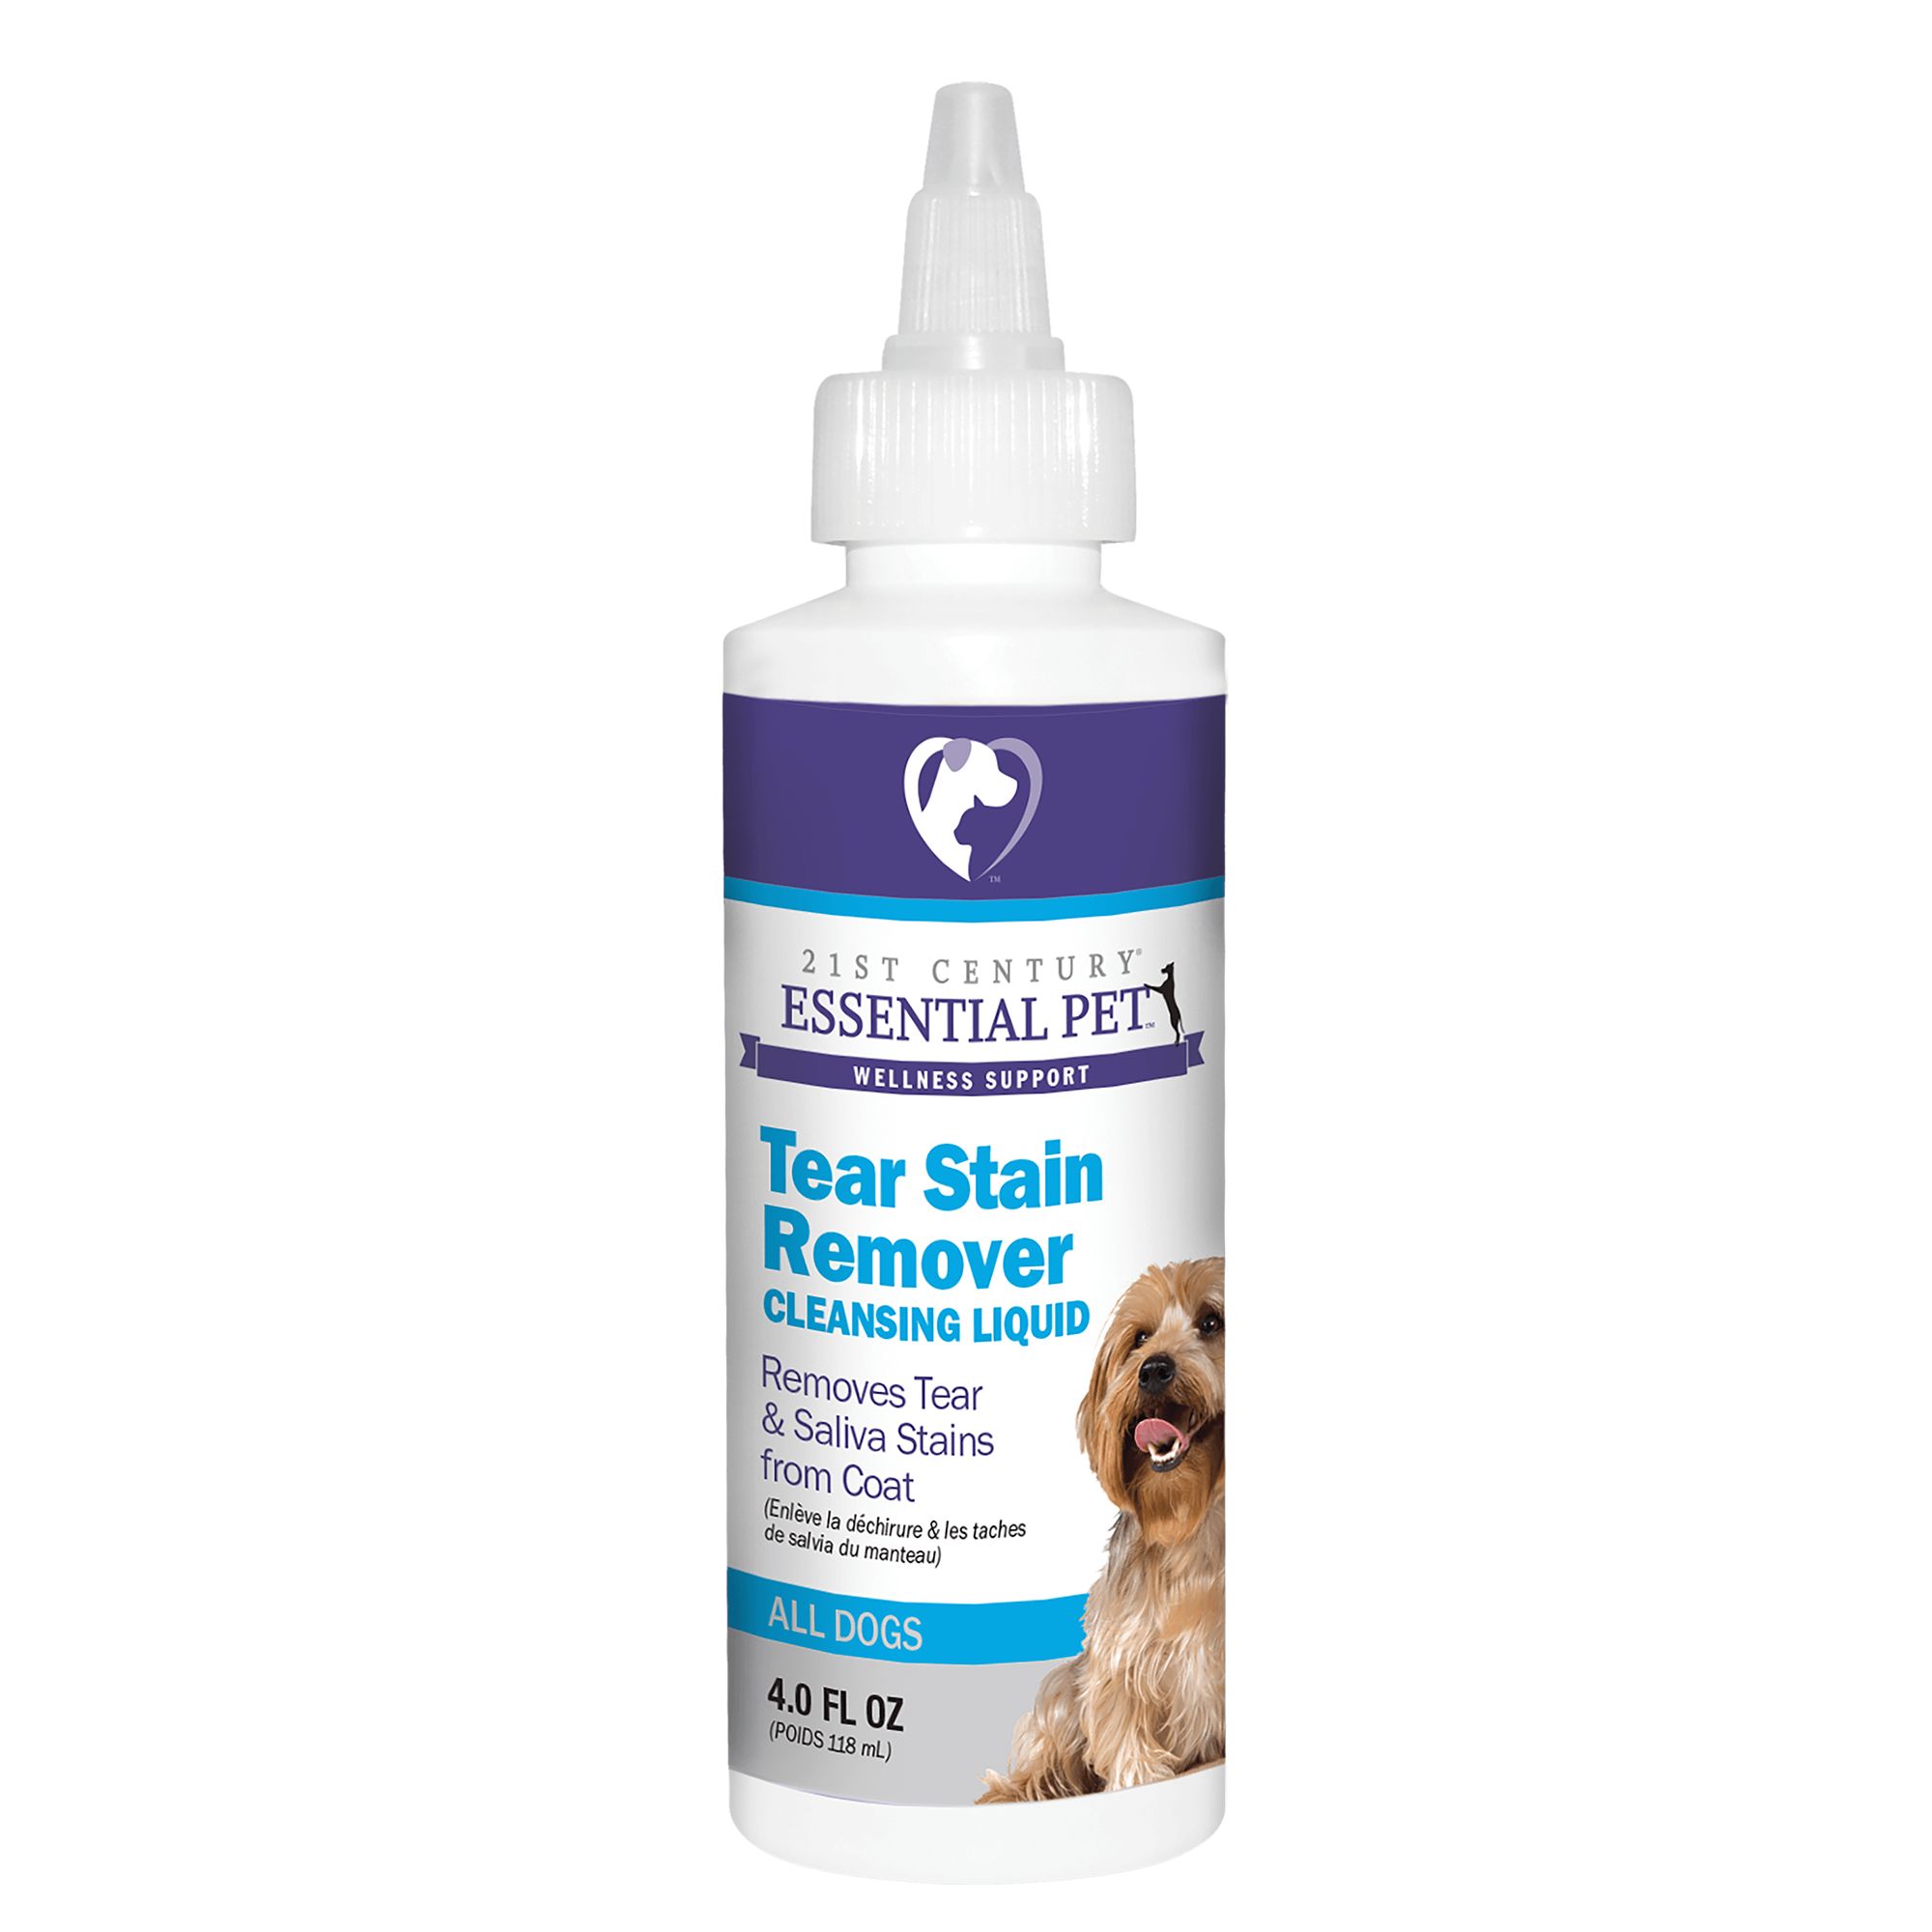 Tear Stain Remover Cleansing Liquid 